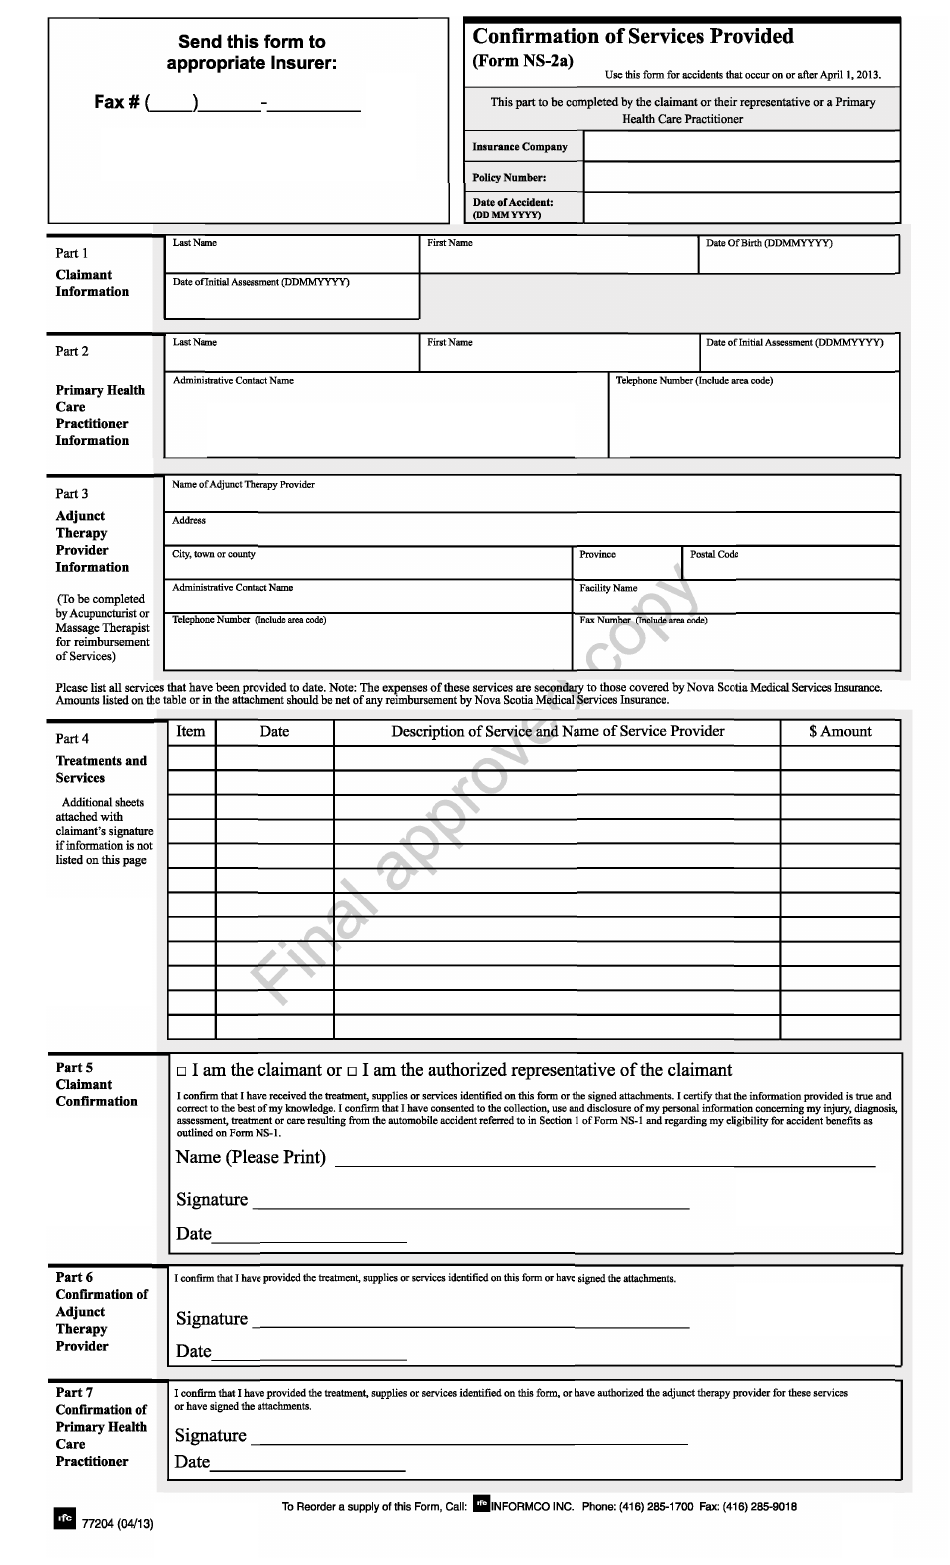 form-ns-2a-download-printable-pdf-or-fill-online-confirmation-of